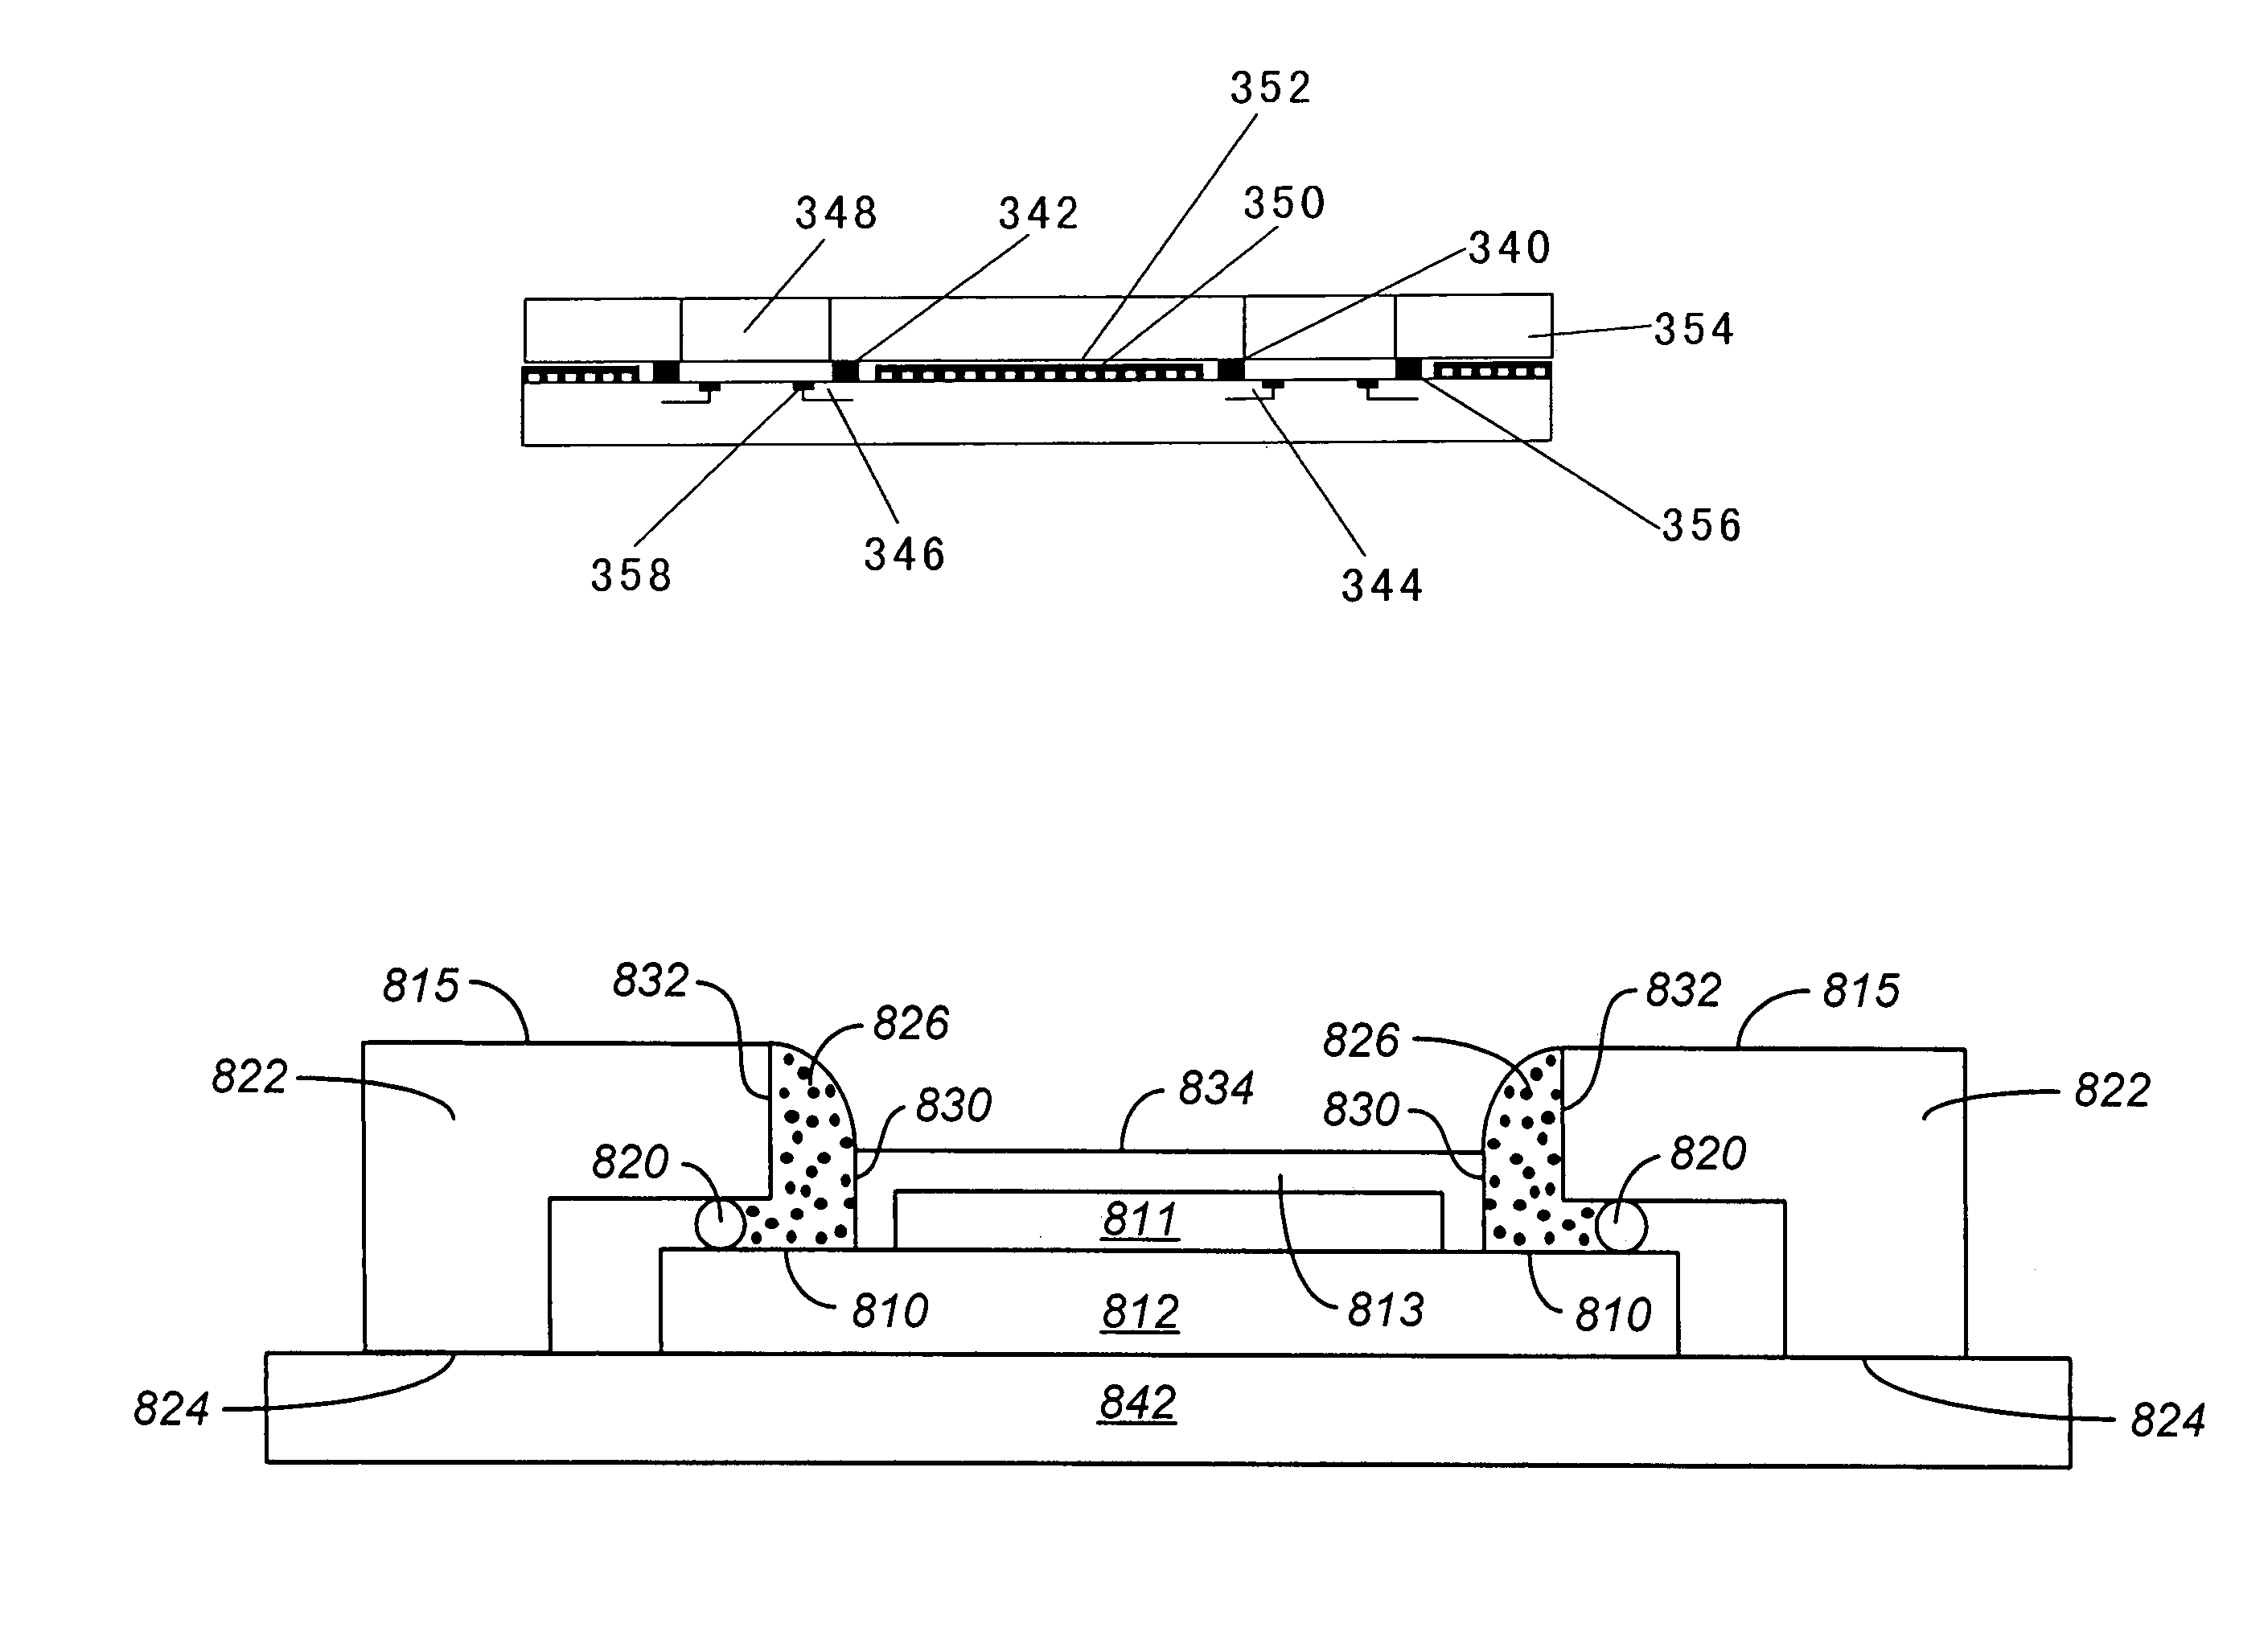 Apparatus for micro-electro mechanical system package